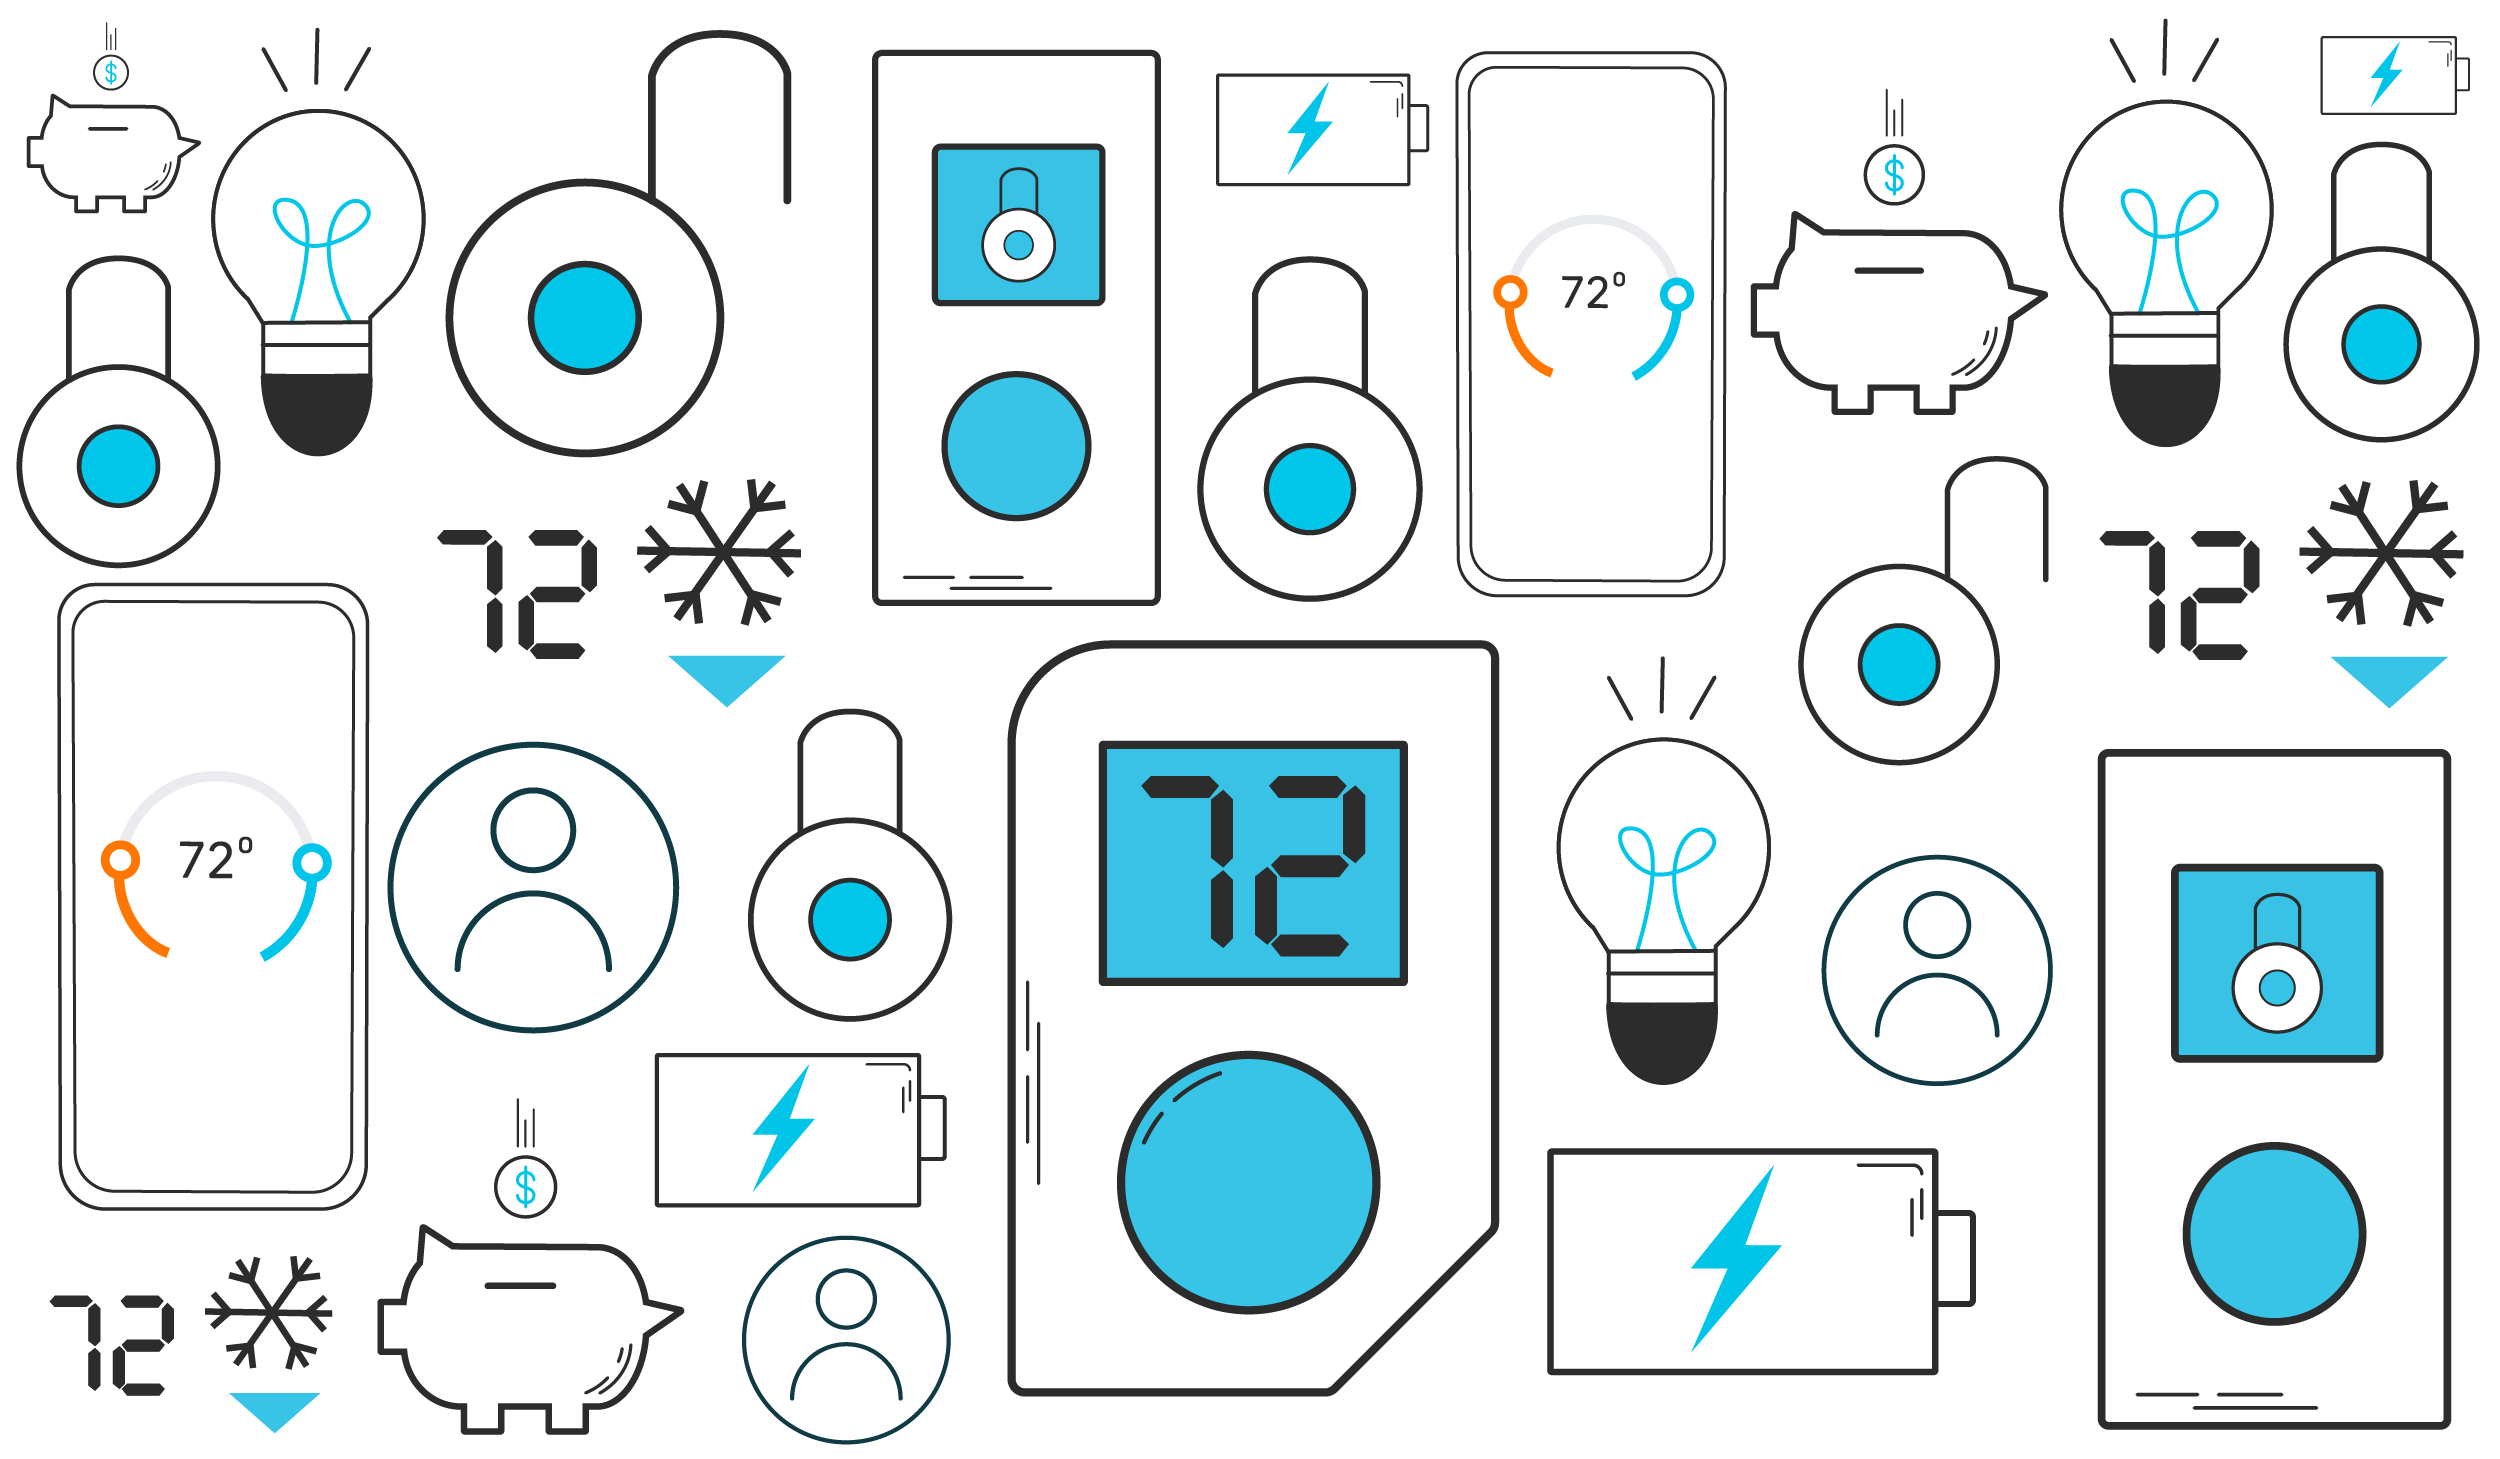 A collage of smart devices and icons used in an IoT system.